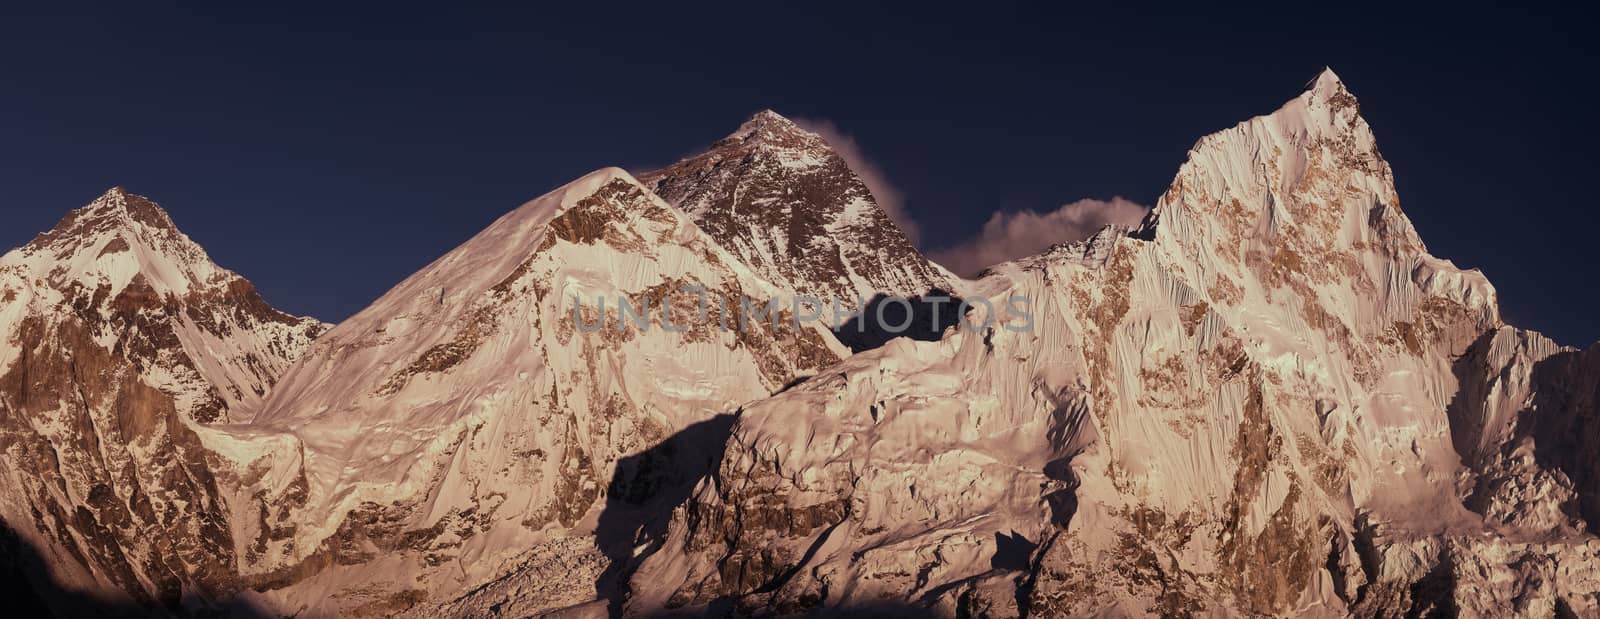 Everest Summit panoramic view with Lhotse and Nuptse peaks by Arsgera